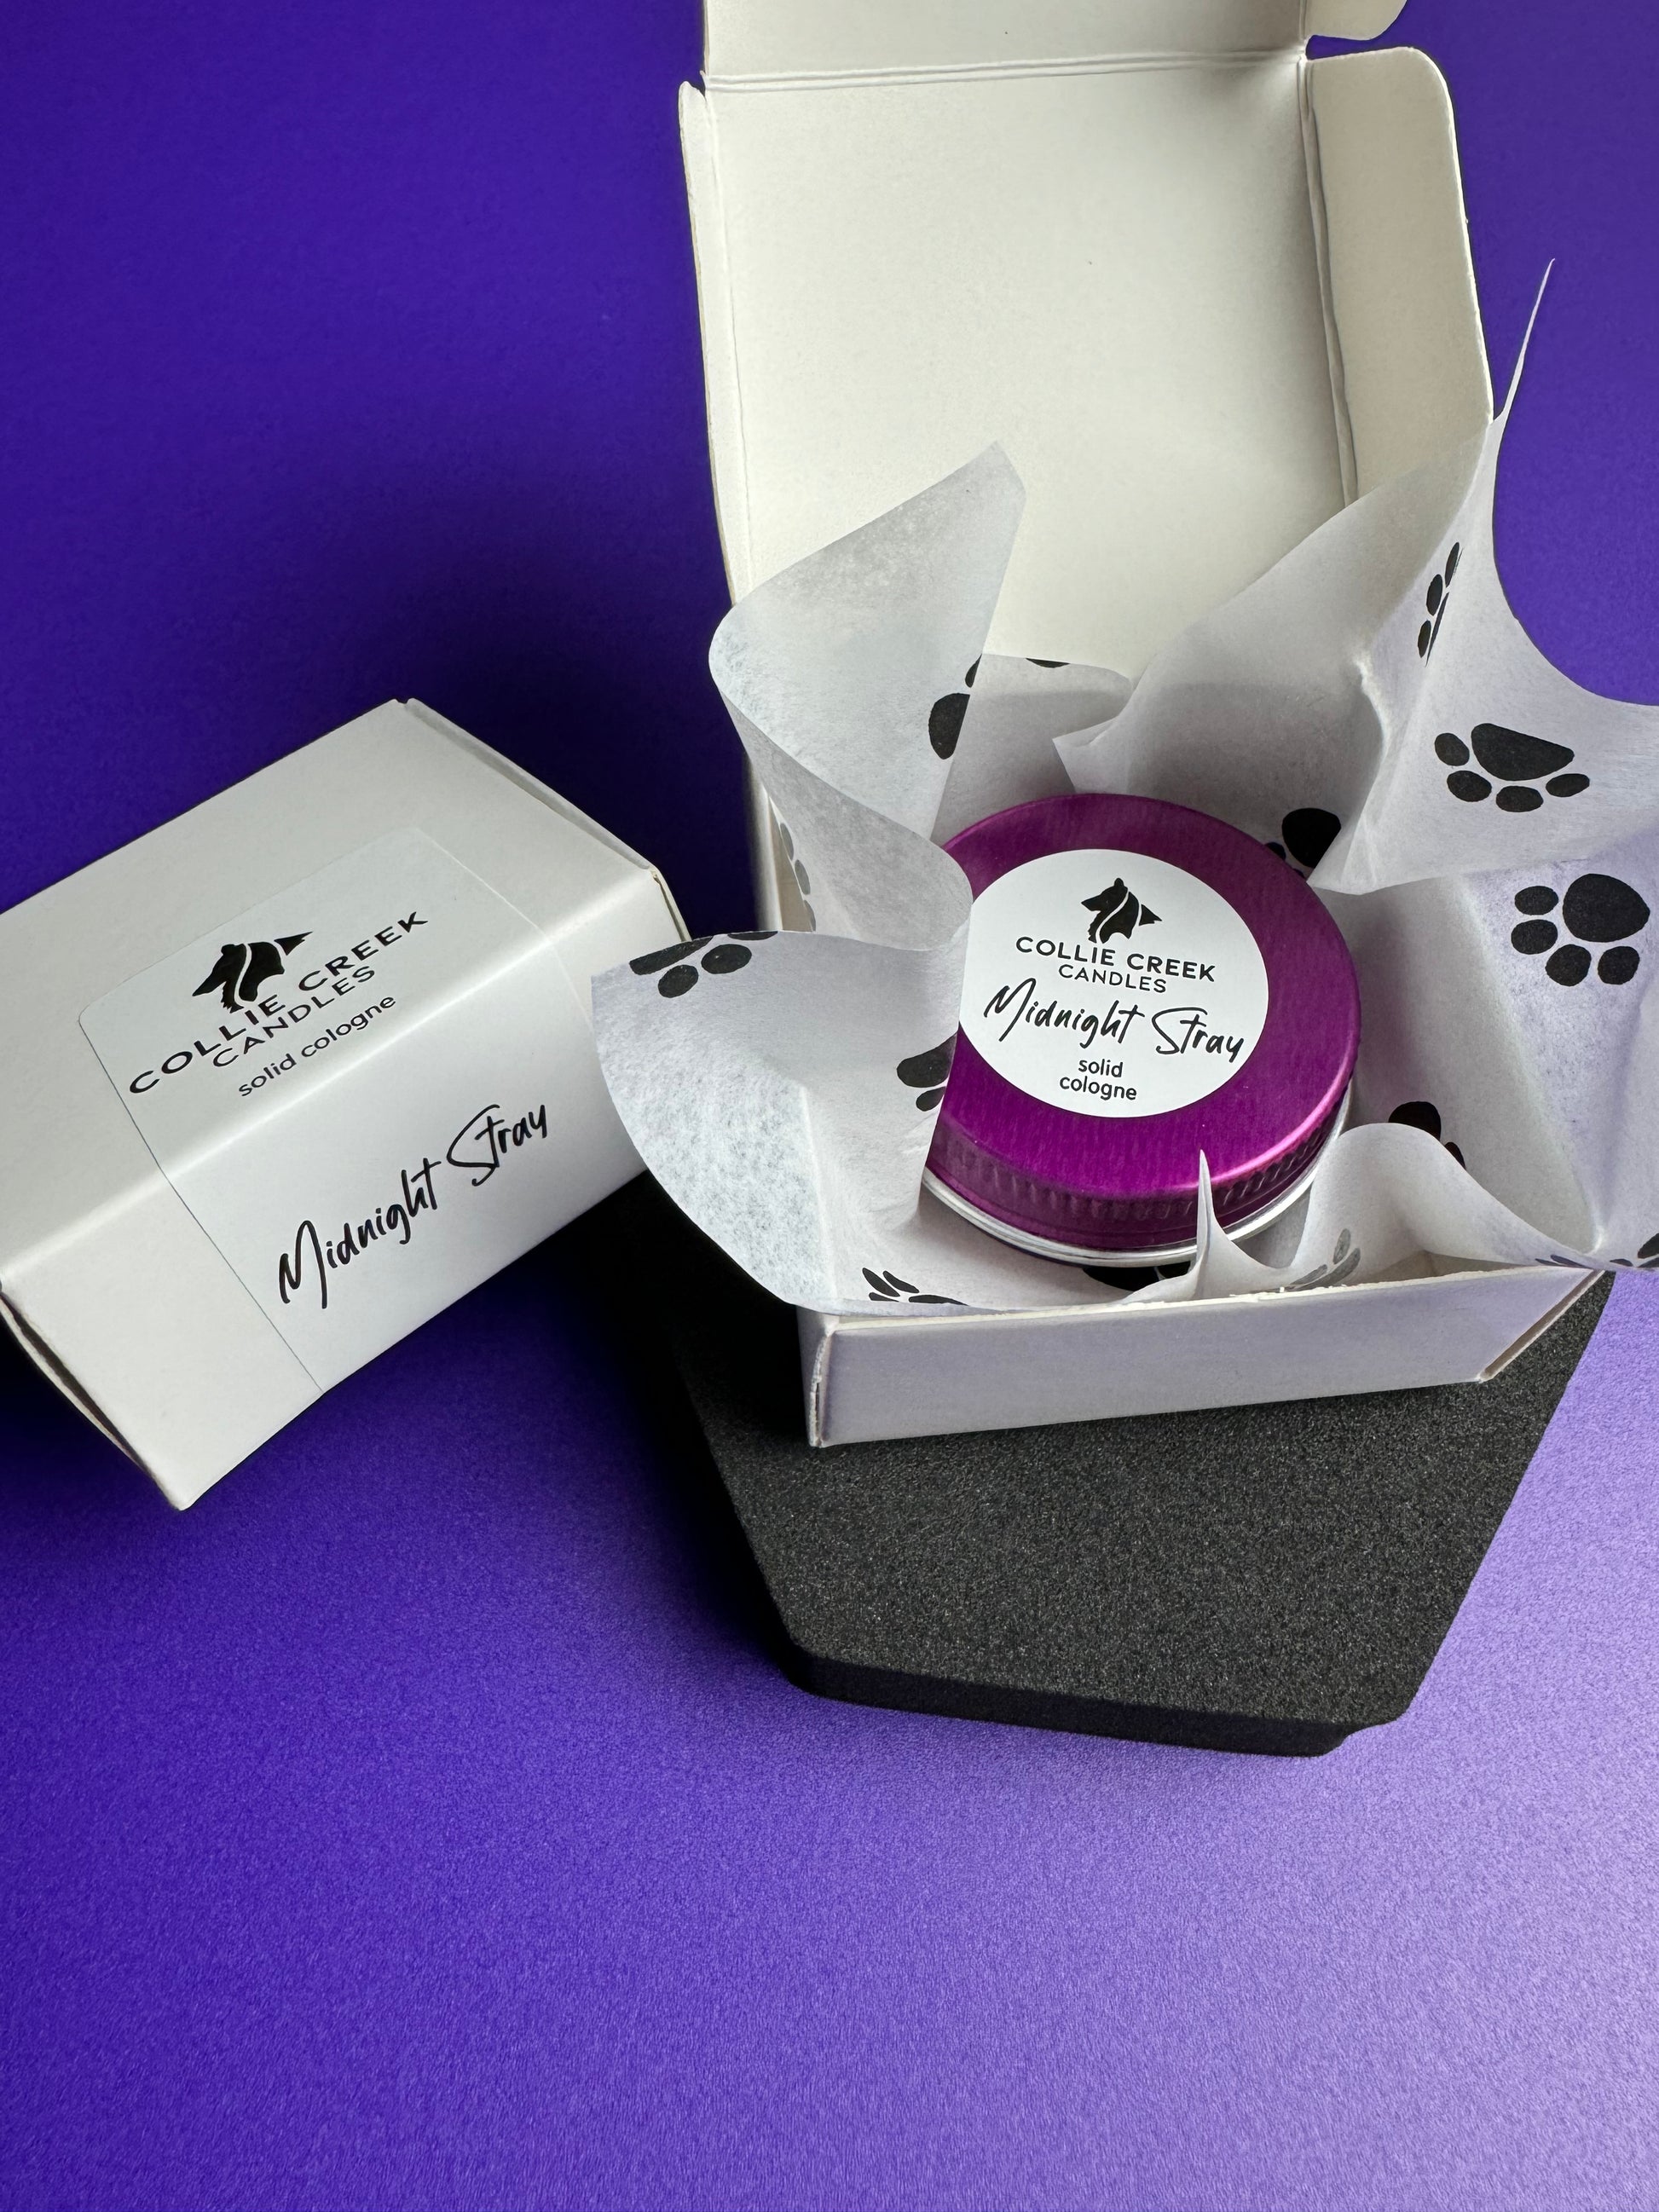 Solid colognes in lavender or patchouli scent in a purple tin paw print tissue paper white gift box.